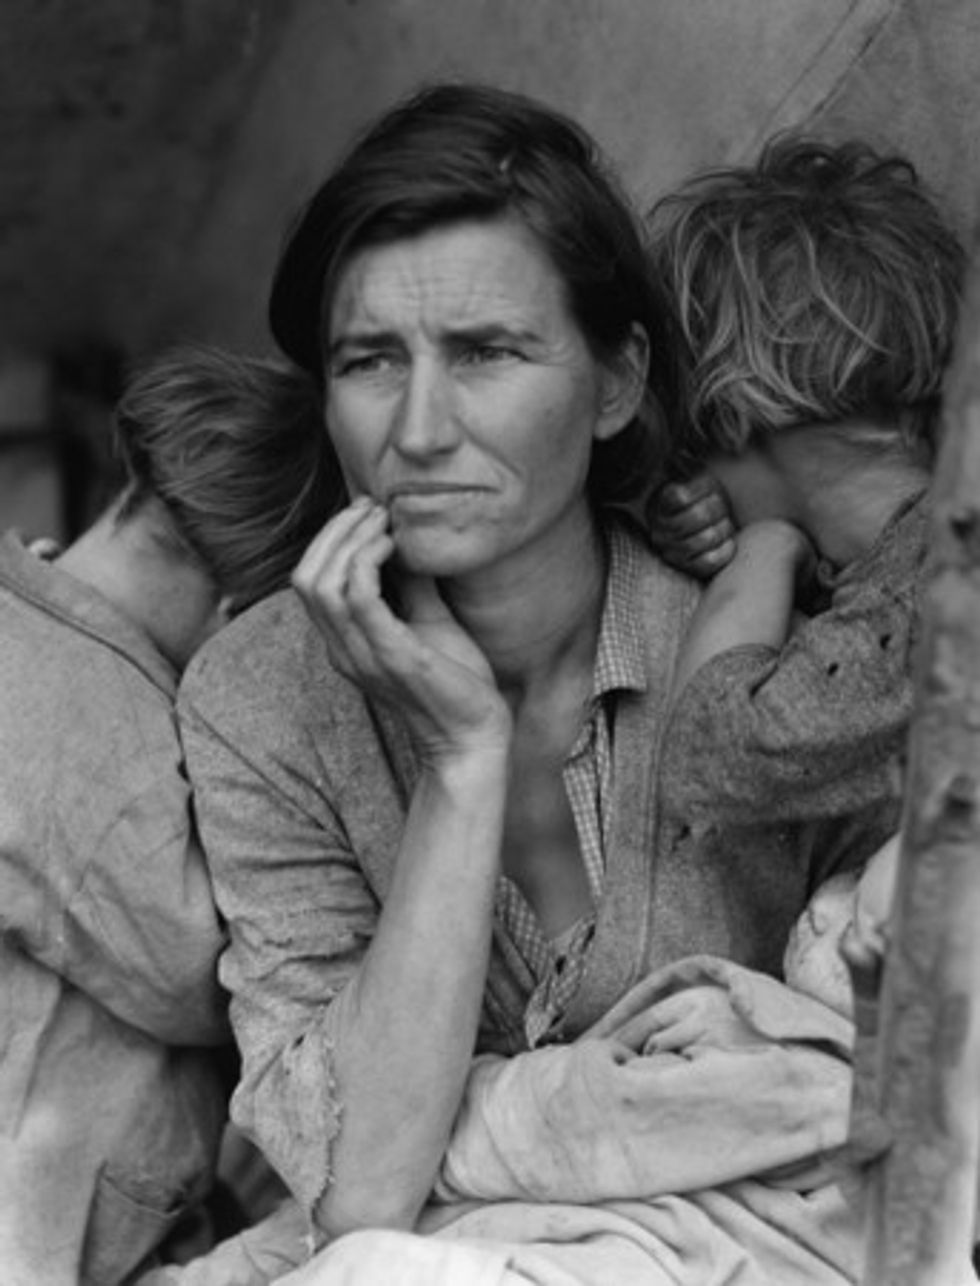 Sexy Ladies of the Great Depression